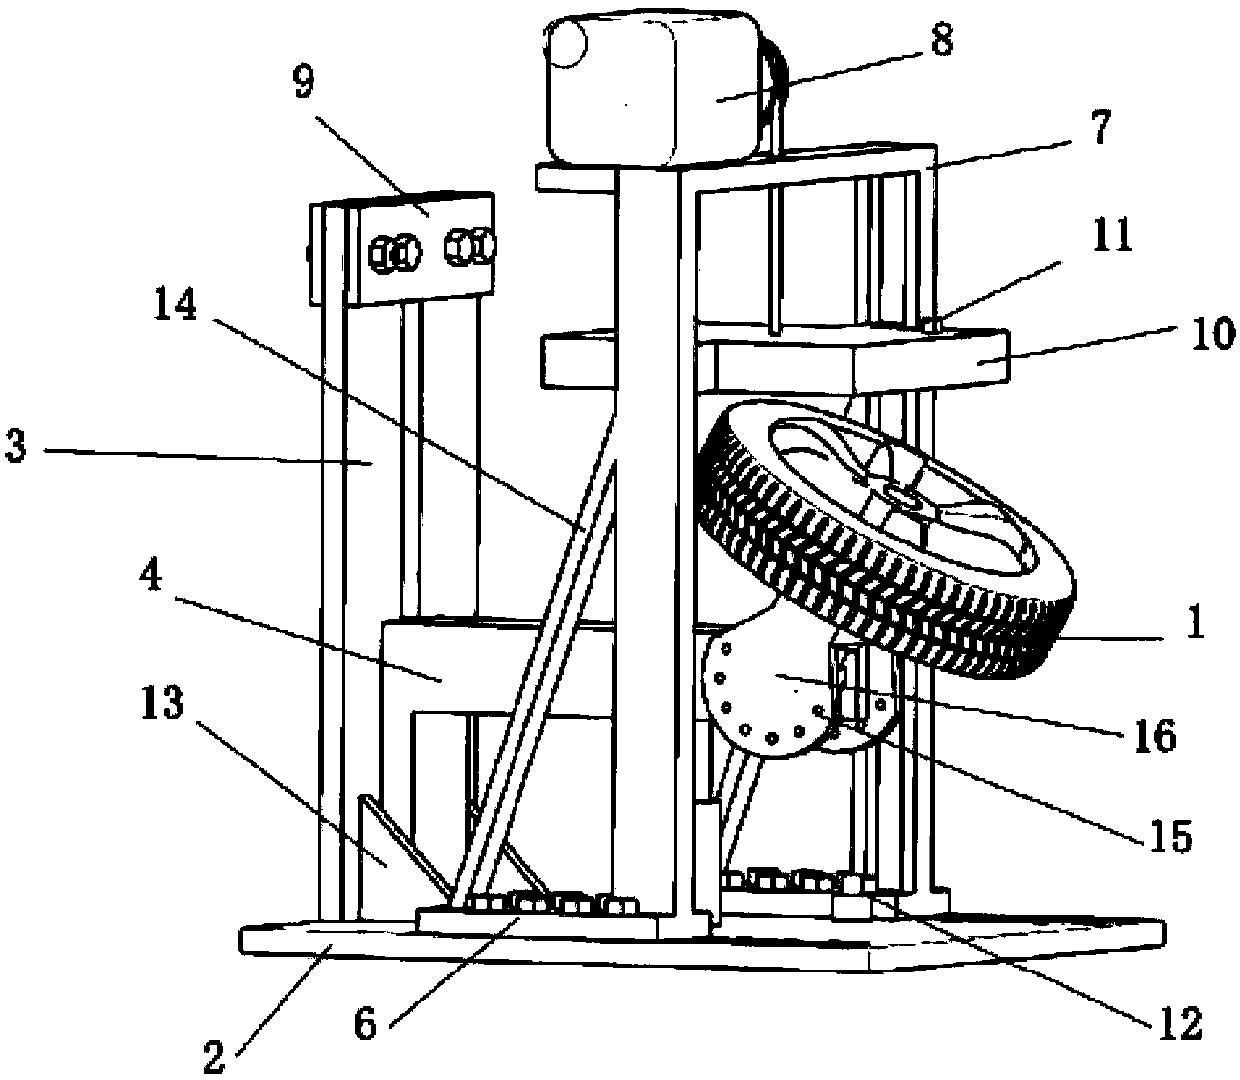 Multi-angle dynamic stiffness experimental device for tire